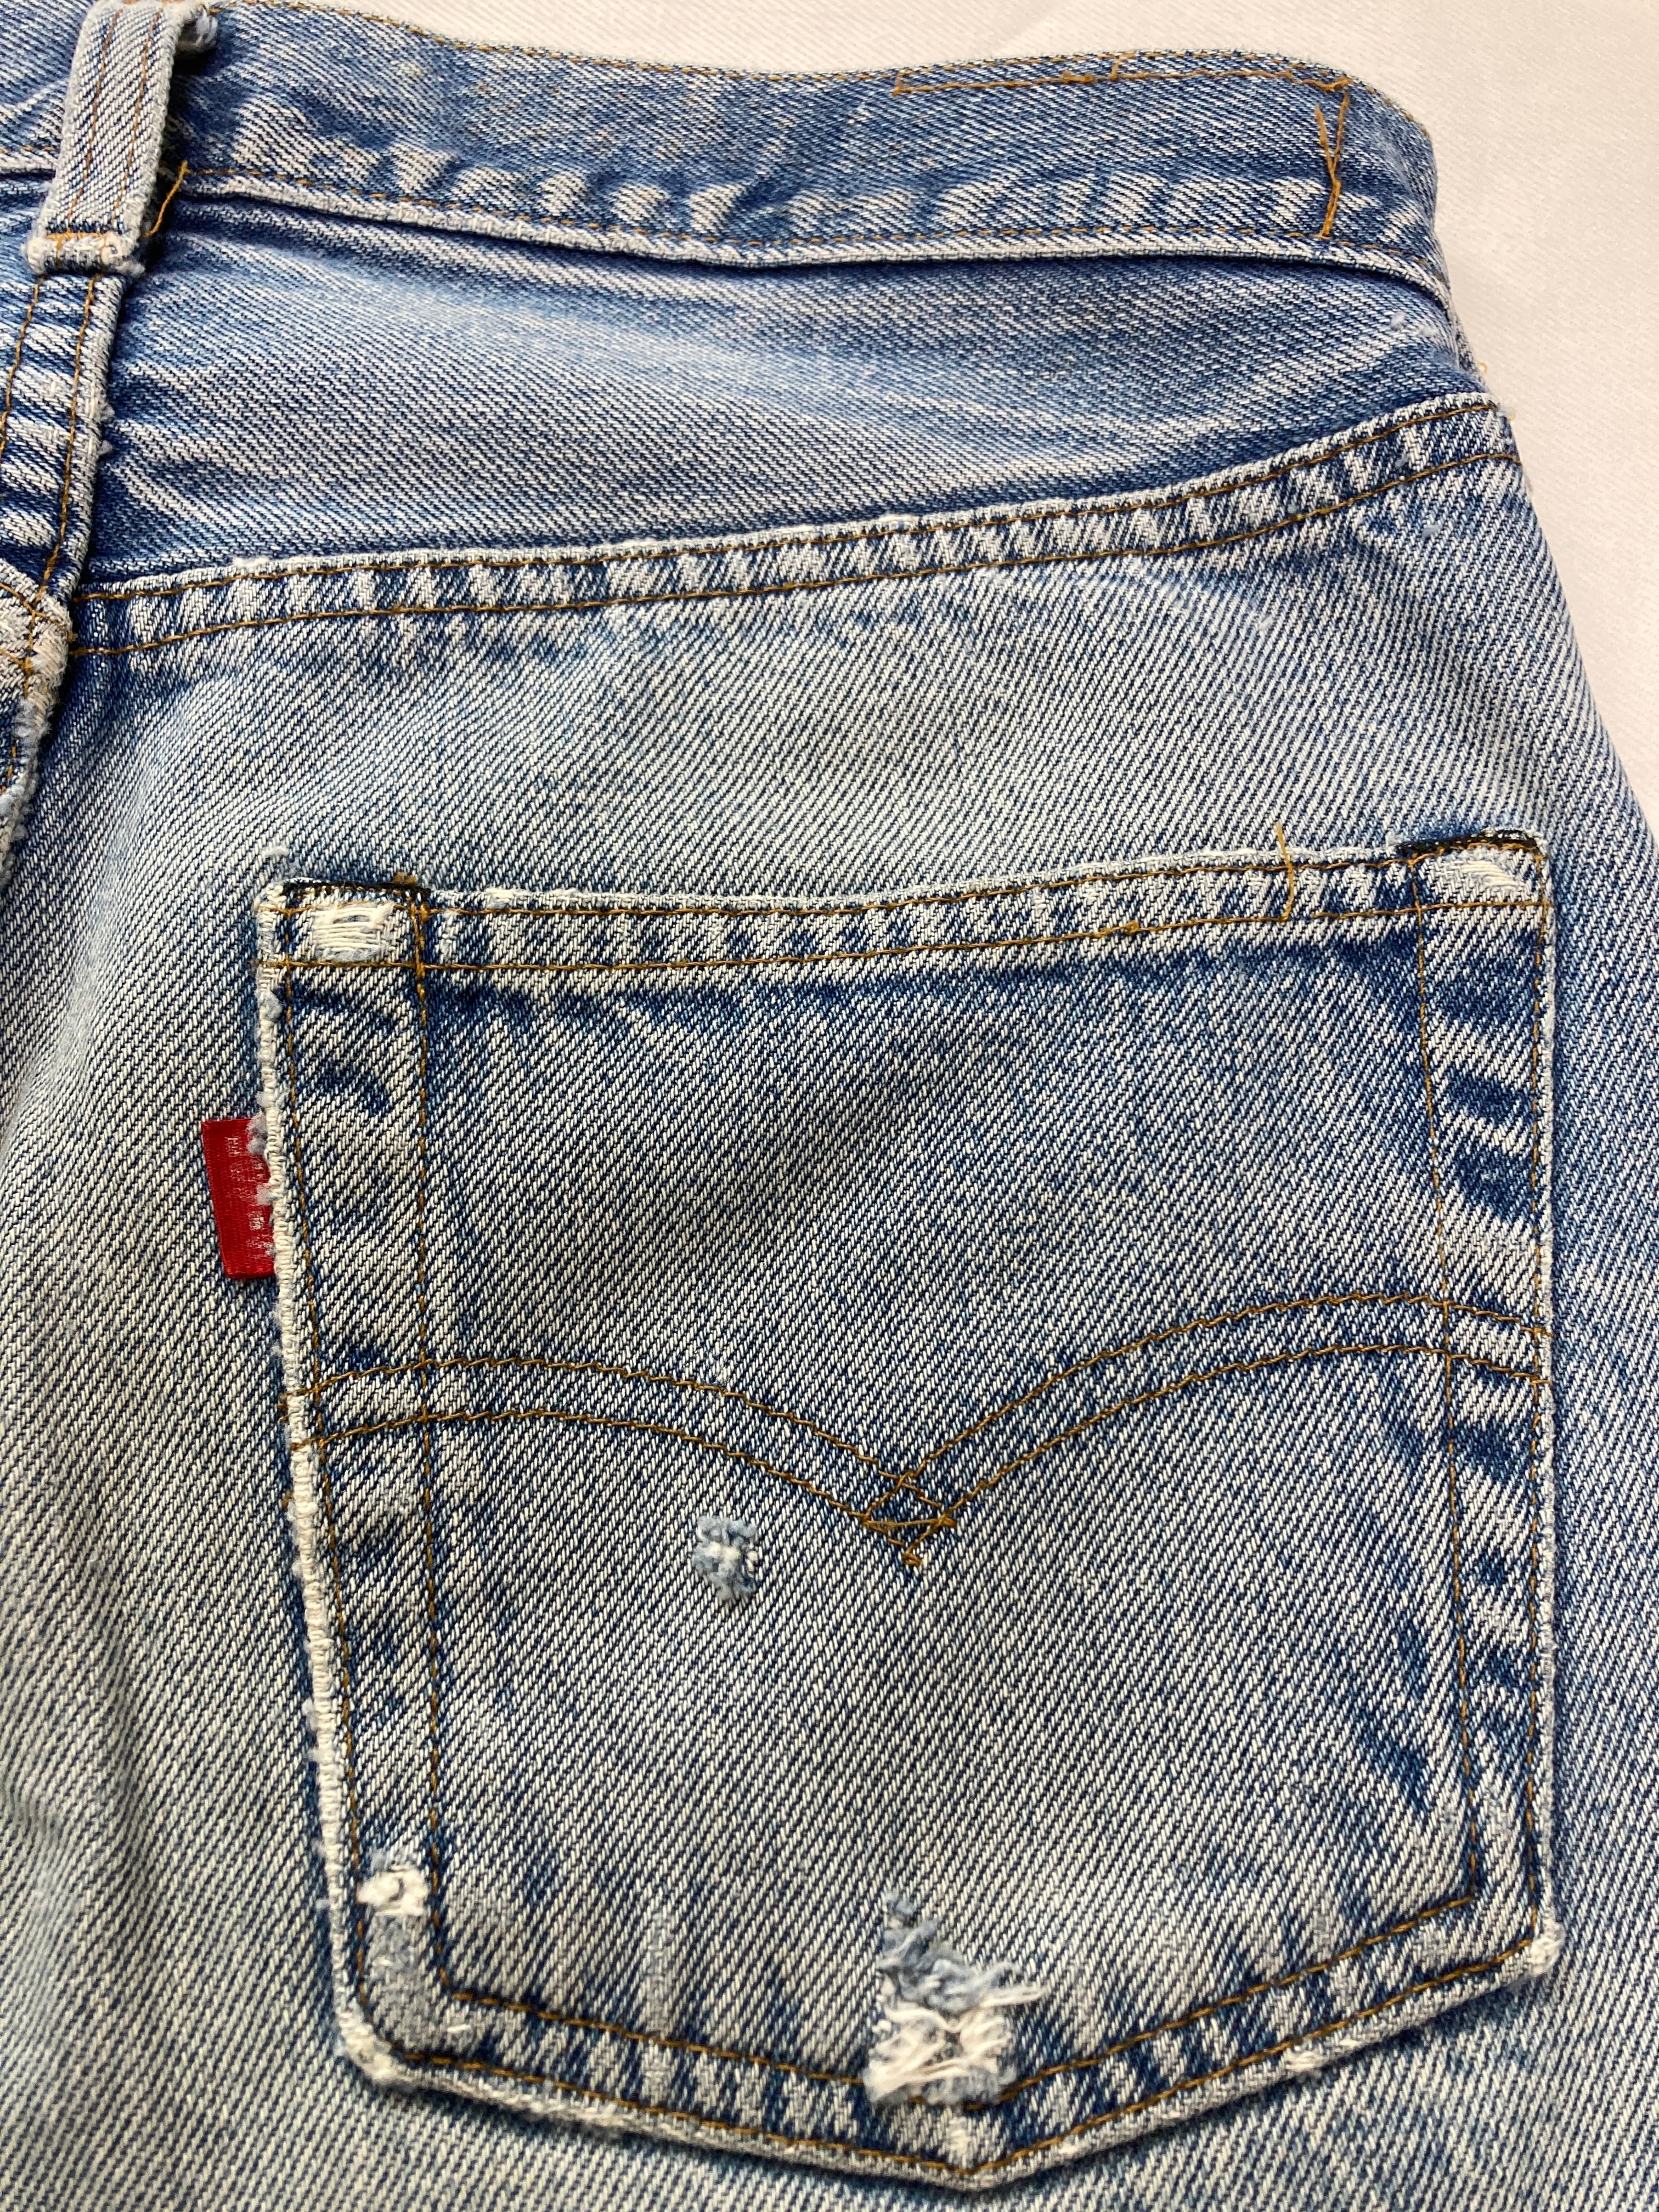 Levi's 501 赤耳 MADE IN U.S.A 1983's | YIELD VINTAGE